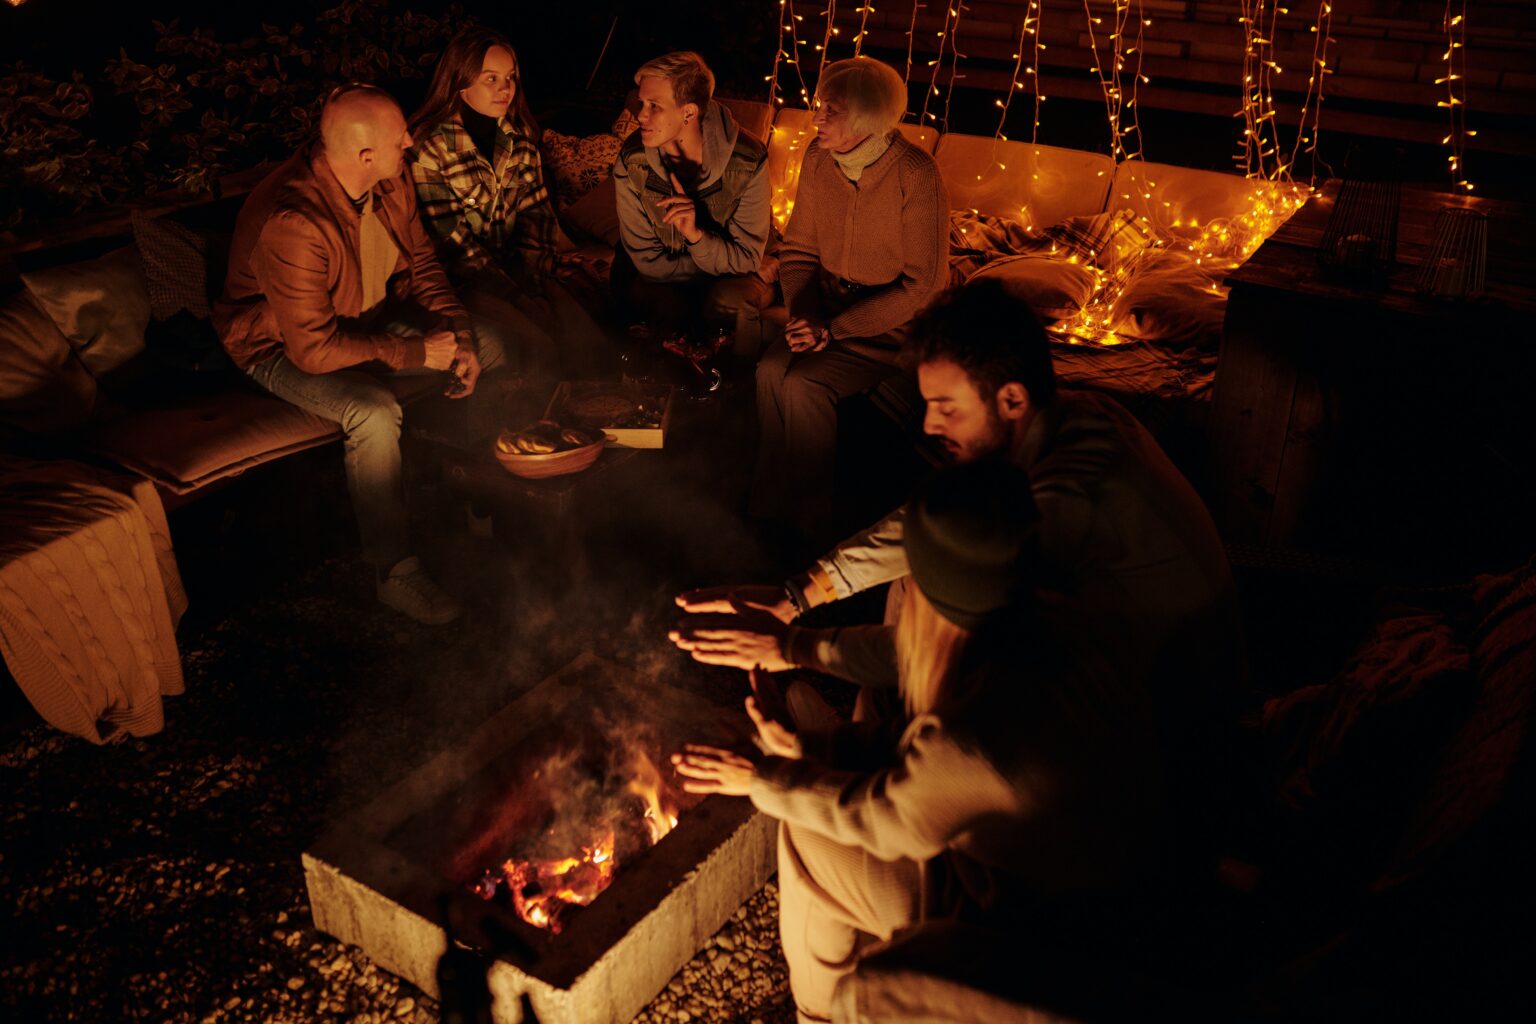 Friends seated around a firepit at night